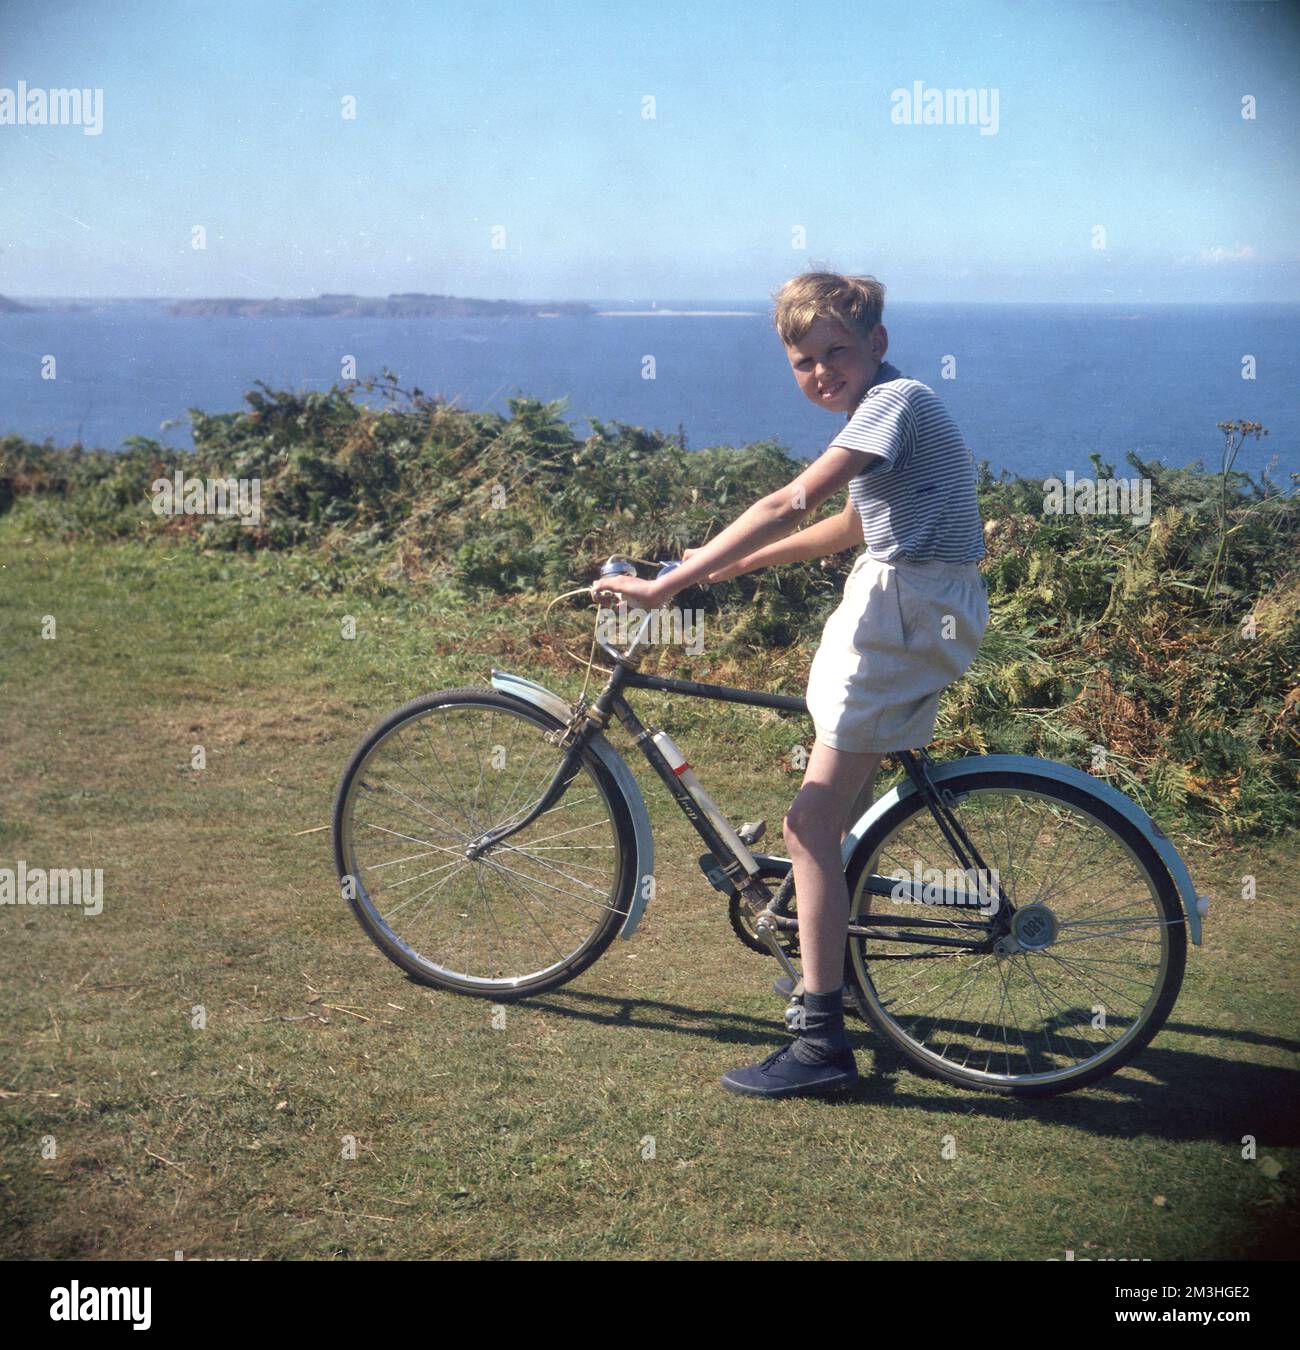 1960s, historical, a teenage boy on his bicycle of the era, a Hercules Jeep, on a grassy path overlooking the coast, England, UK, The youngster, wearing a short-sleeve striped top, shorts and blue plimsolls, is sitting astride the British mini-roadster, which has a bicycle pump on the frame. Stock Photo